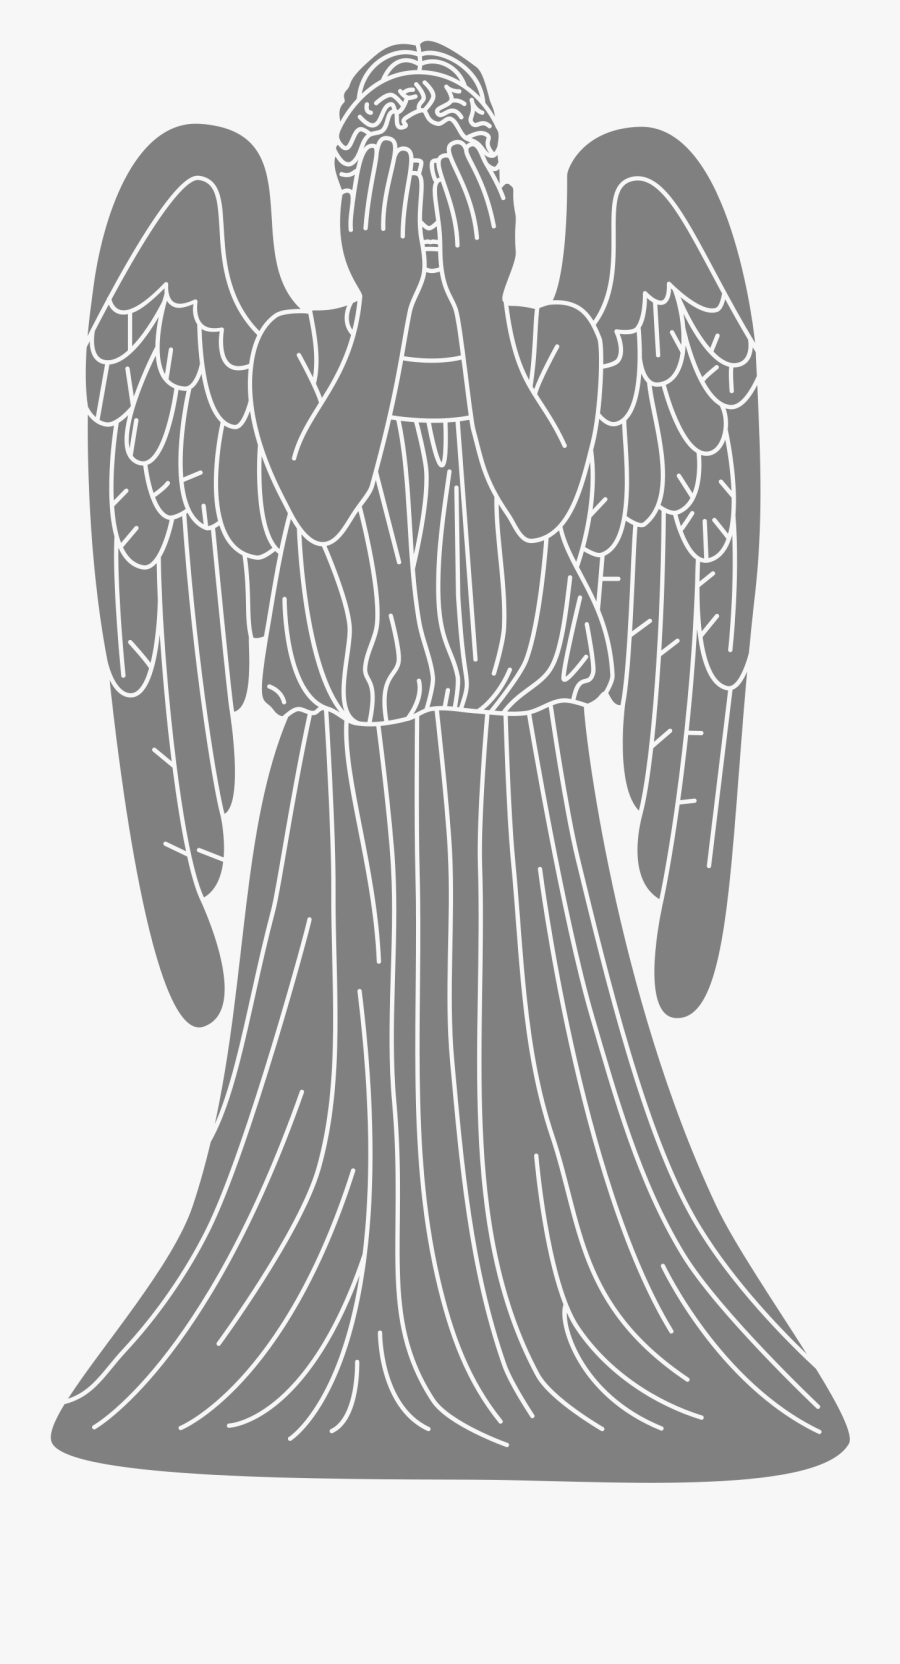 Clipart - Cartoon Doctor Who Weeping Angel, Transparent Clipart